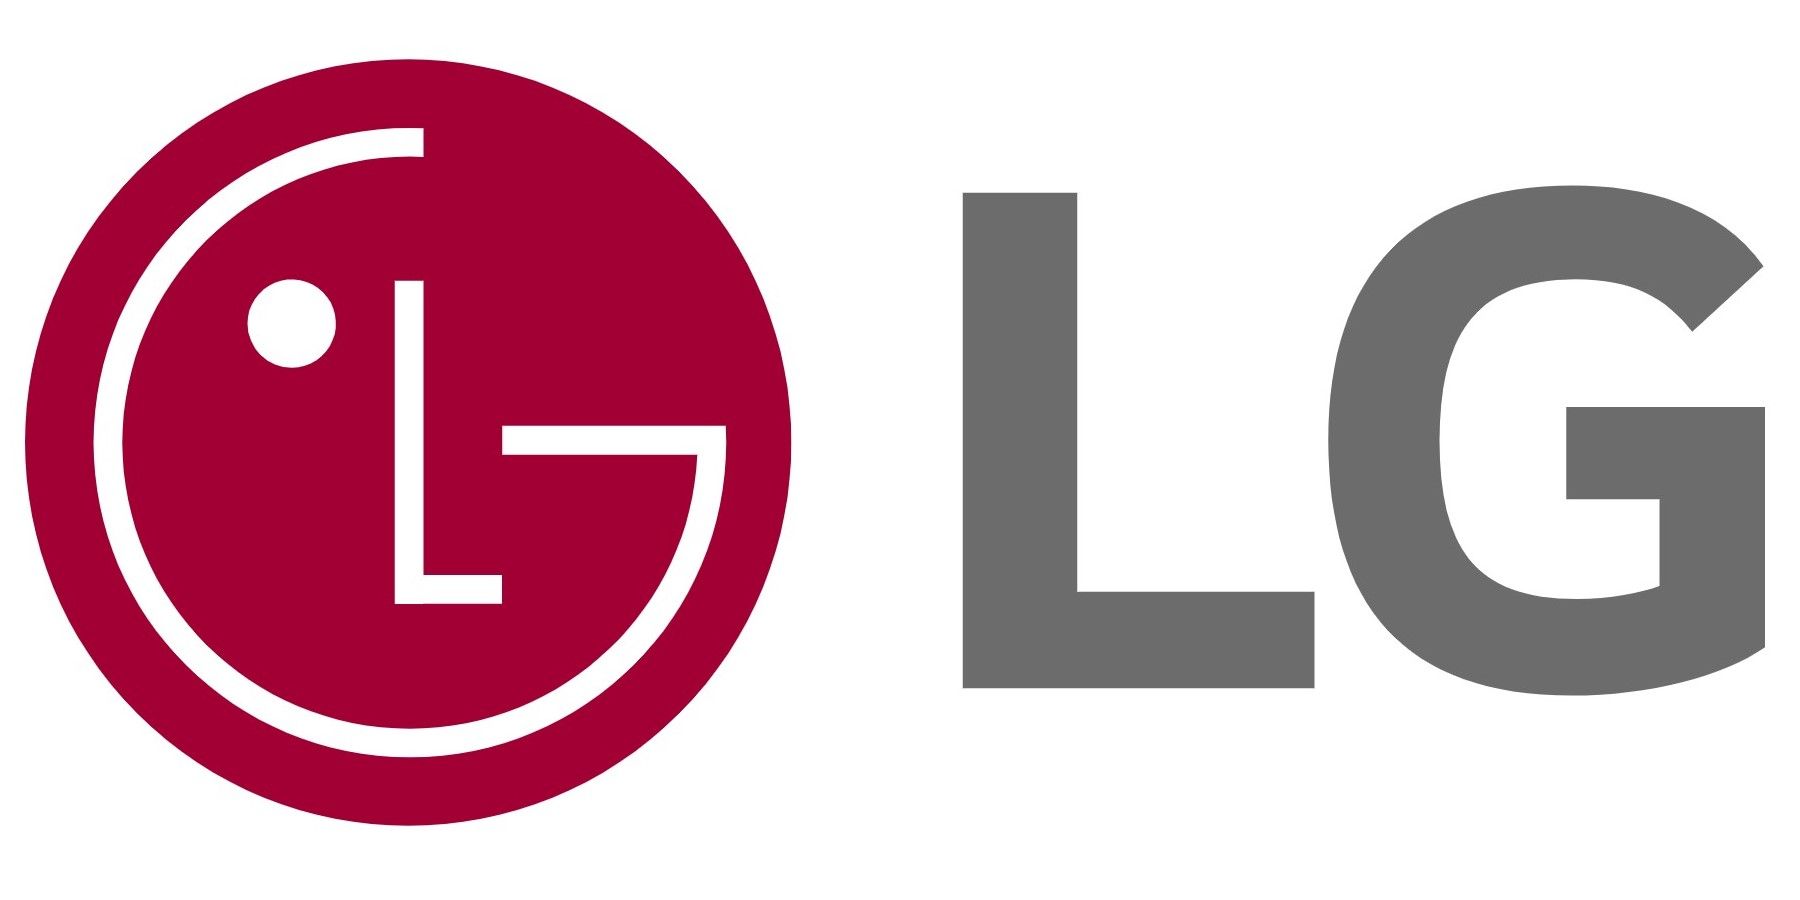 LG Will Bring 480Hz OLED QHD Screen to Gaming Monitors This Year - CNET